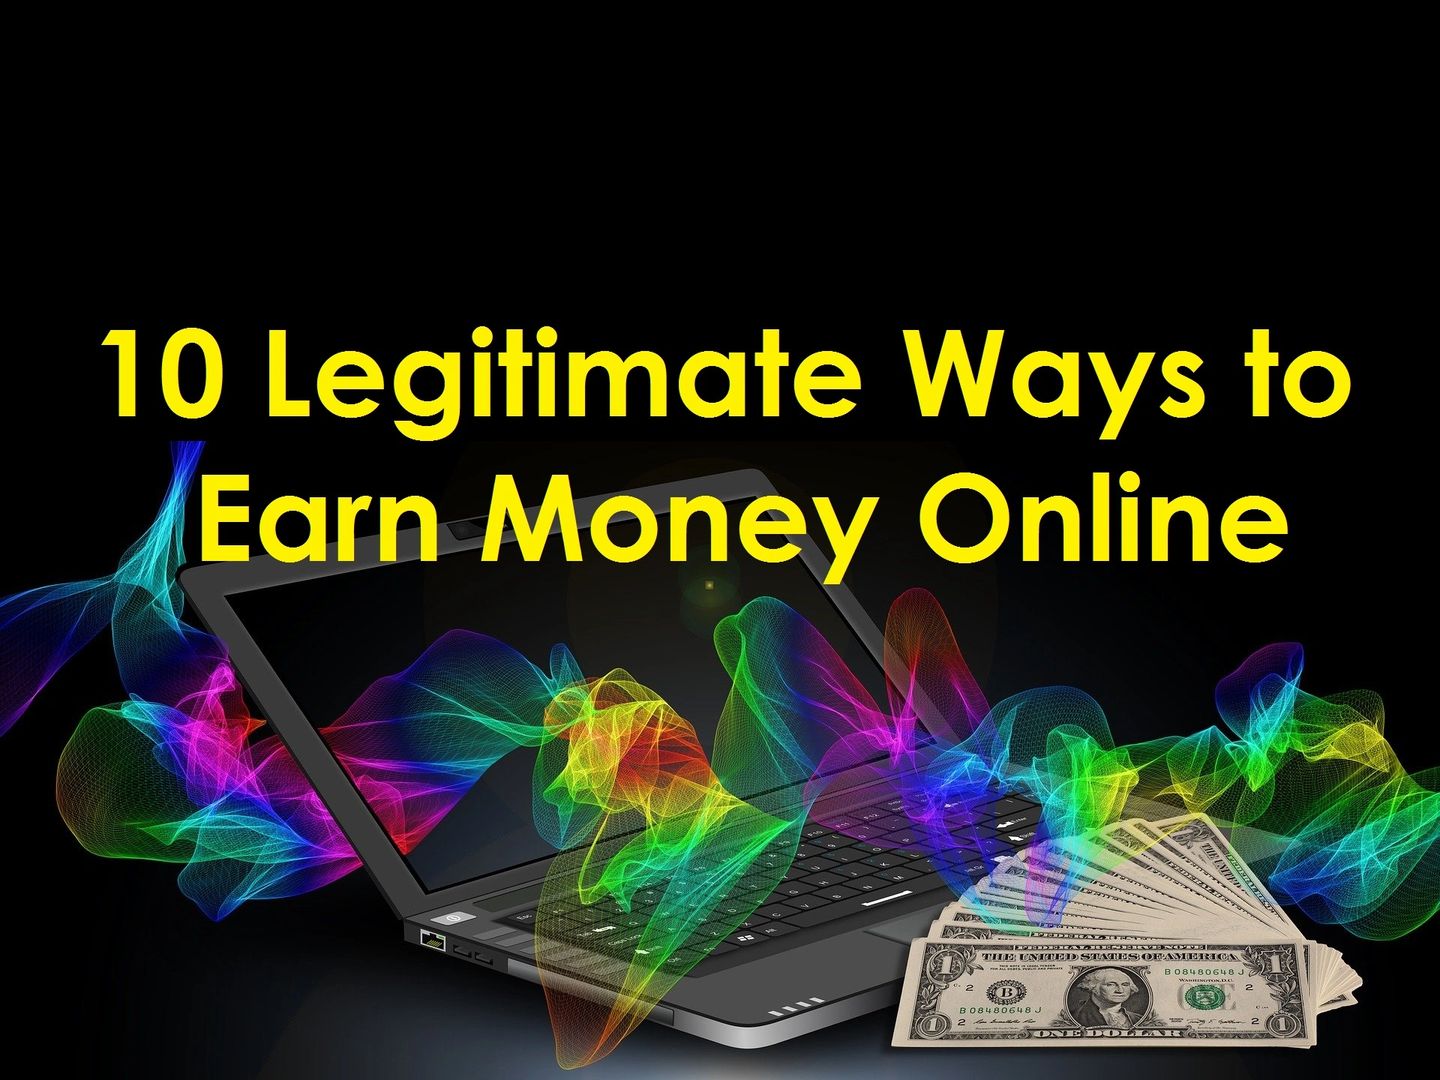 How to Make Money from Home: 10 Legitimate Ways to Earn Money Online